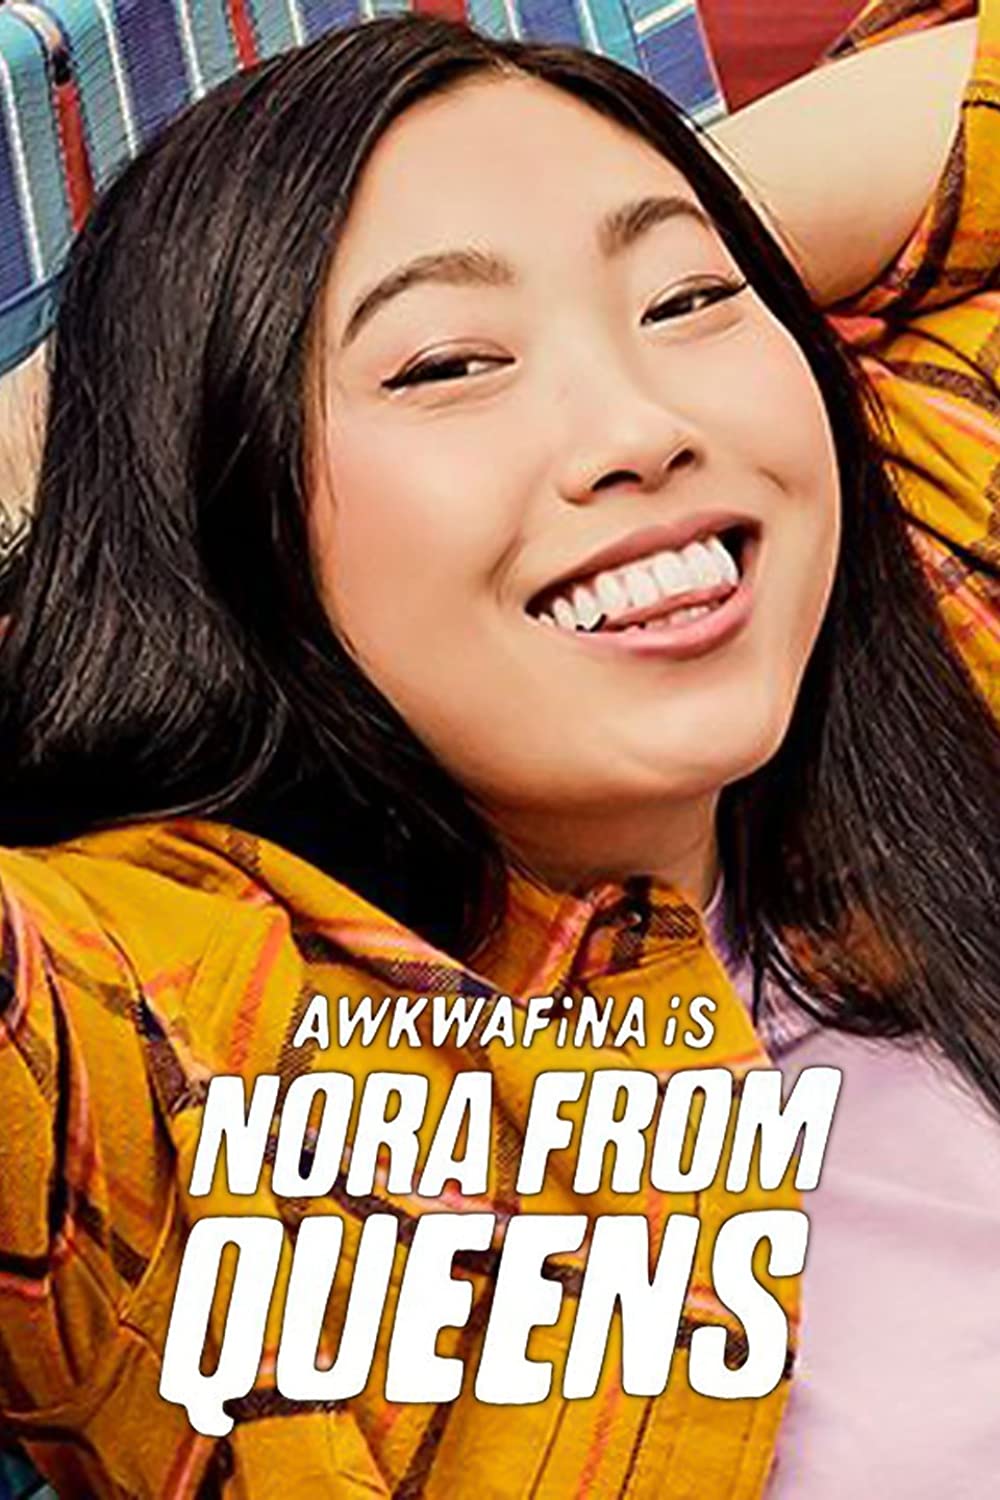 Watch Awkwafina Is Nora from Queens Season 1 TV Series 2022, Official Trailer,